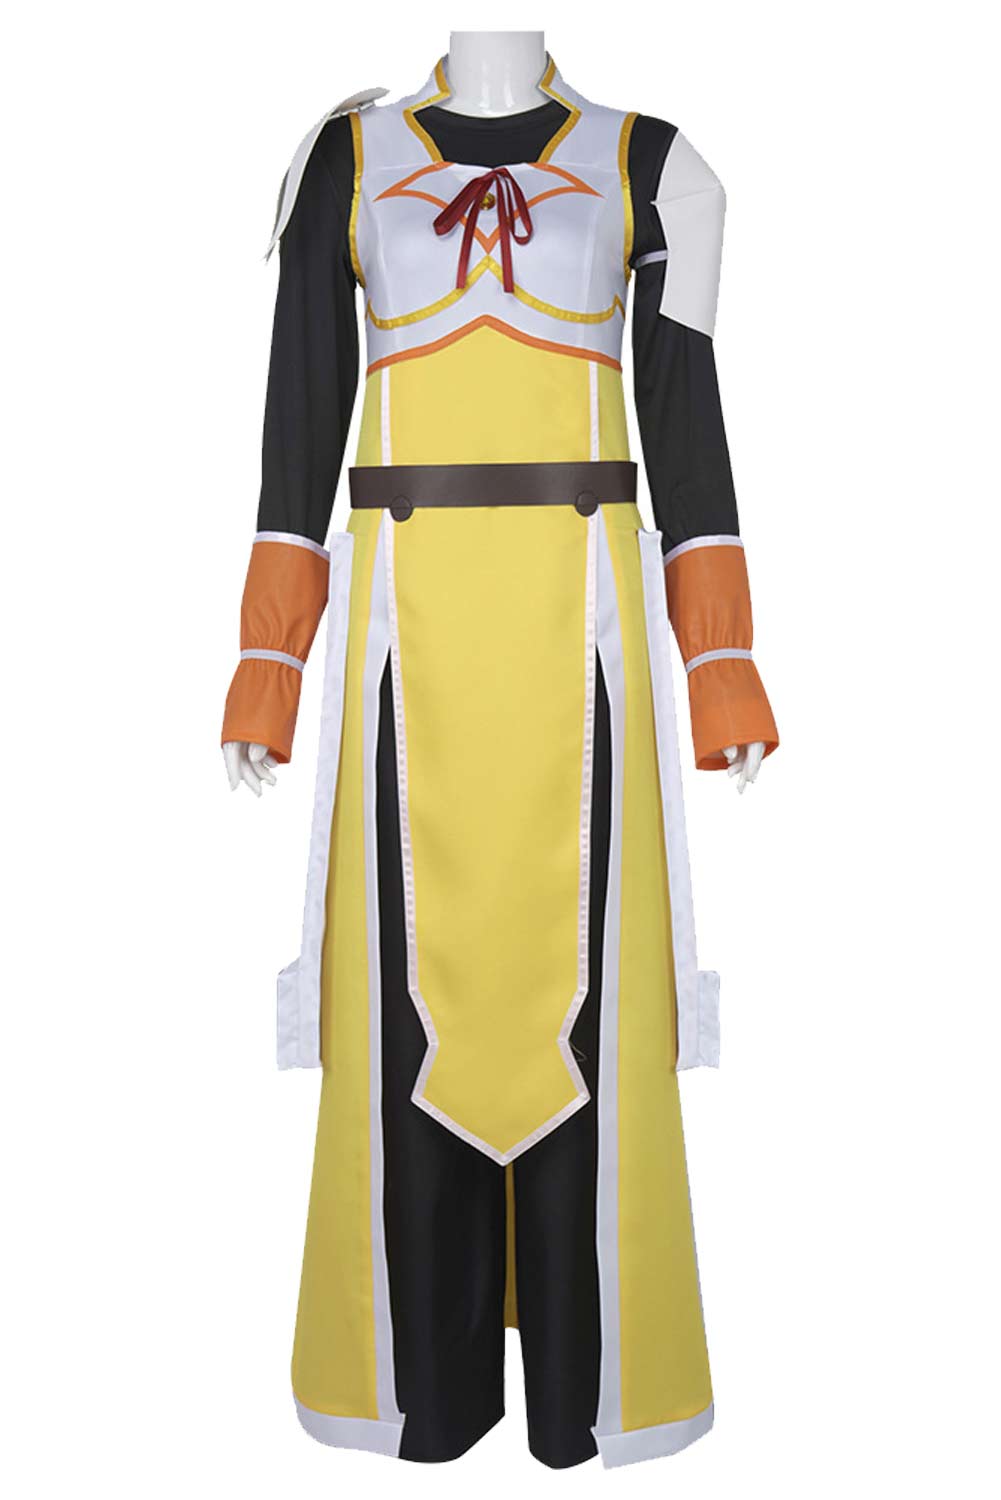 Anime KonoSuba: God's Blessing on This Wonderful World! Darkness Outfits Halloween Cosplay Costume